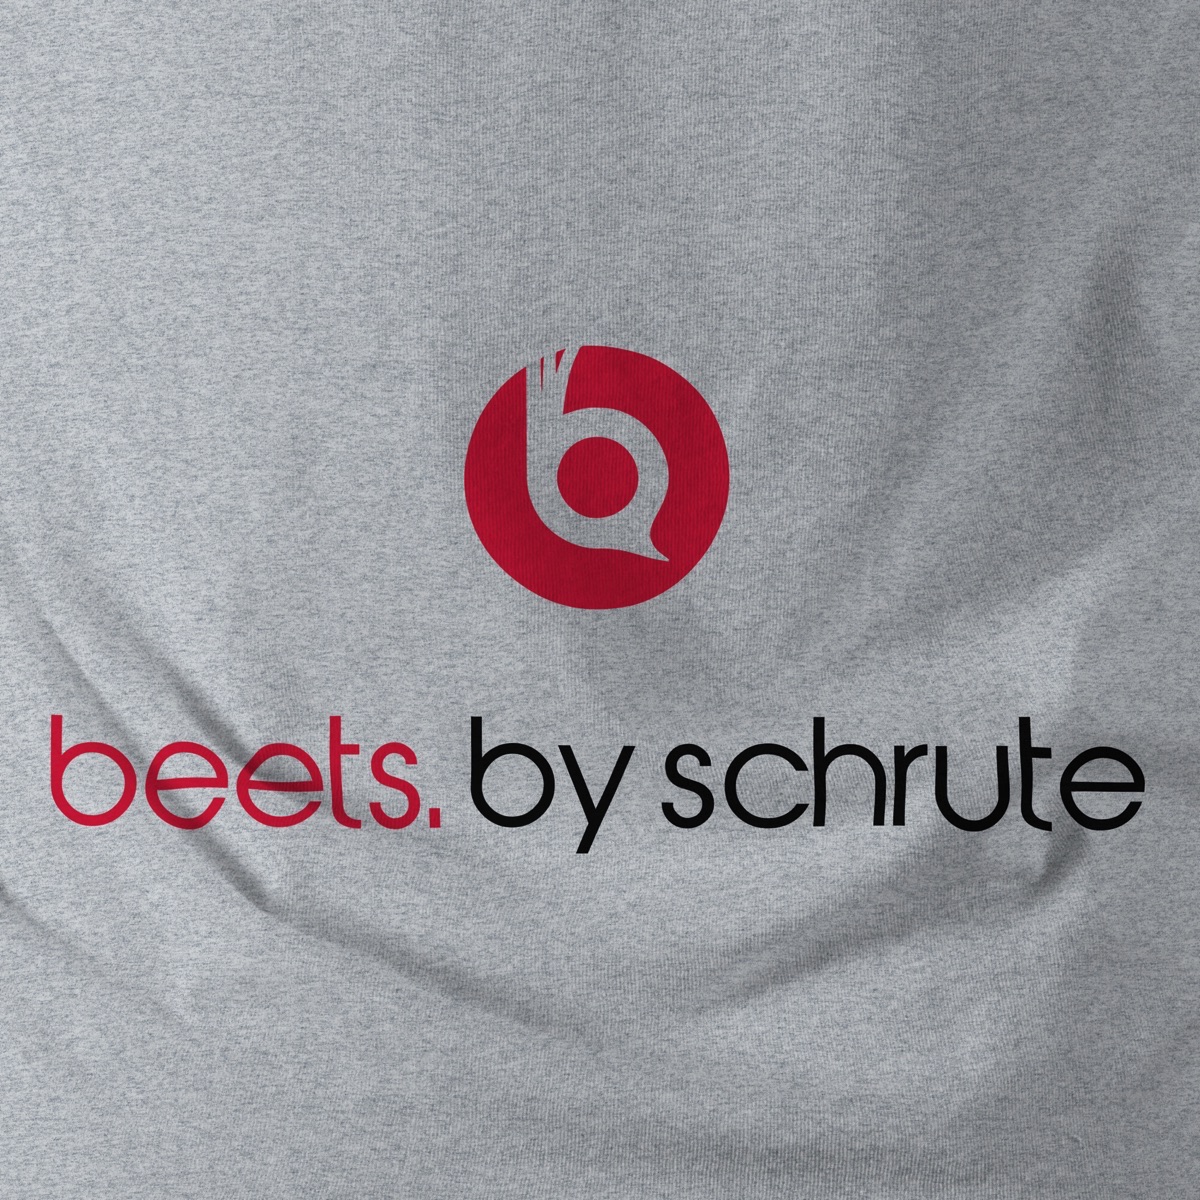 493 Schrute Beets Bed and Breakfast Hoodie dwight office costume funny pam jim